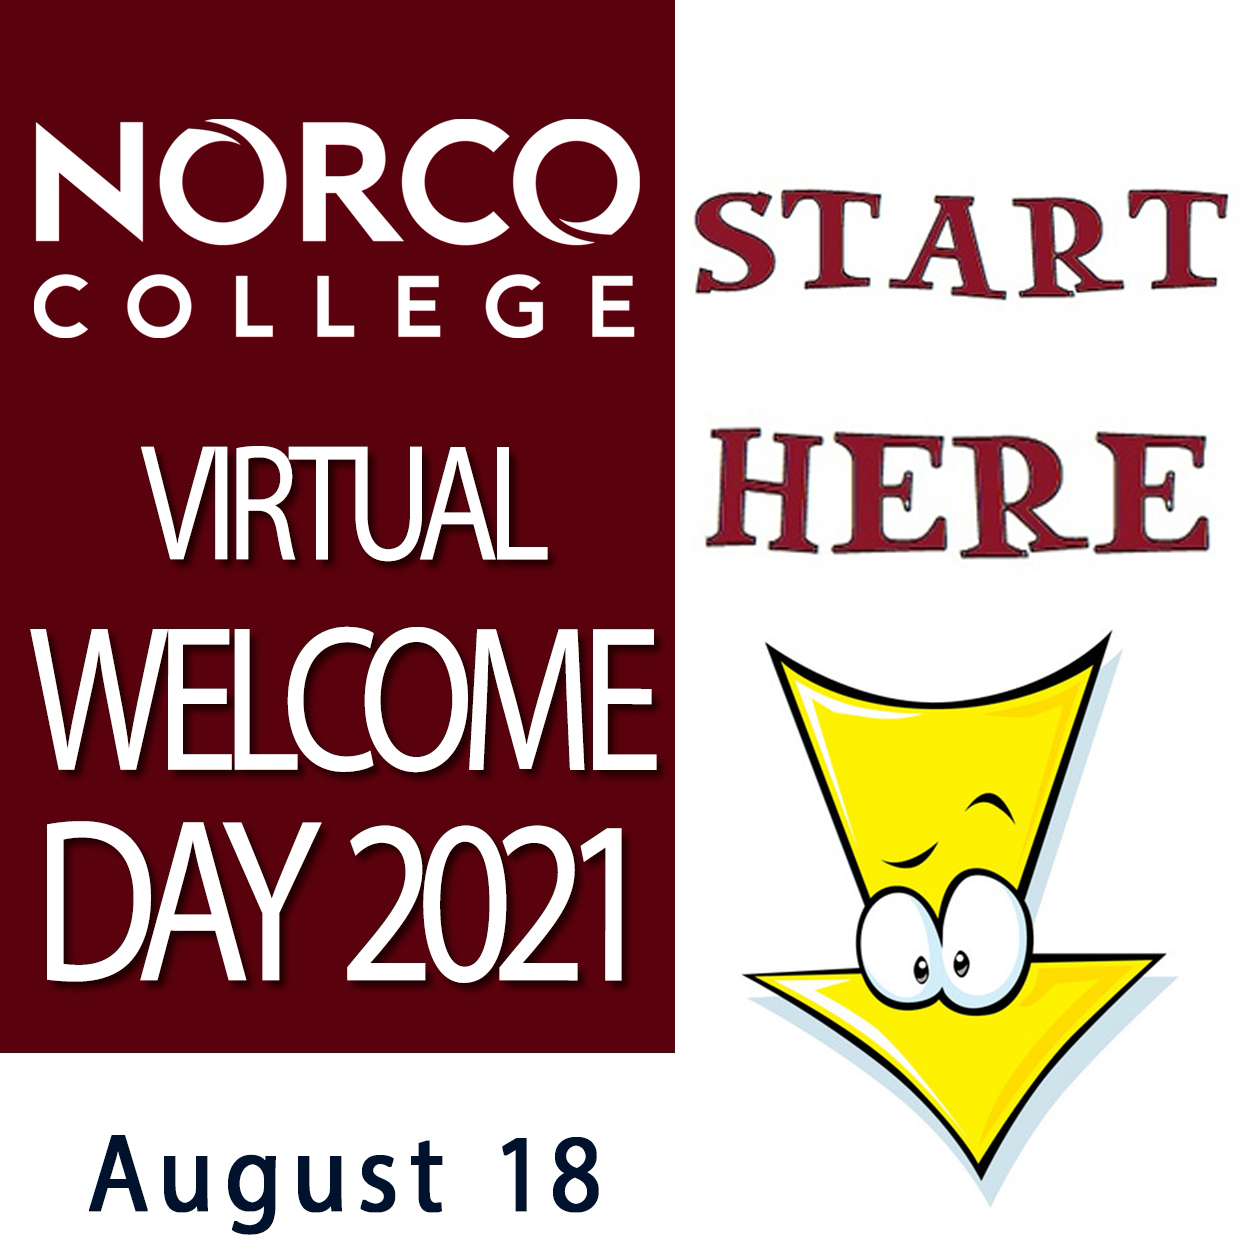 Norco College Welcome Day 2021 Ribbon Logo with START HERE and yellow cartoon arrow